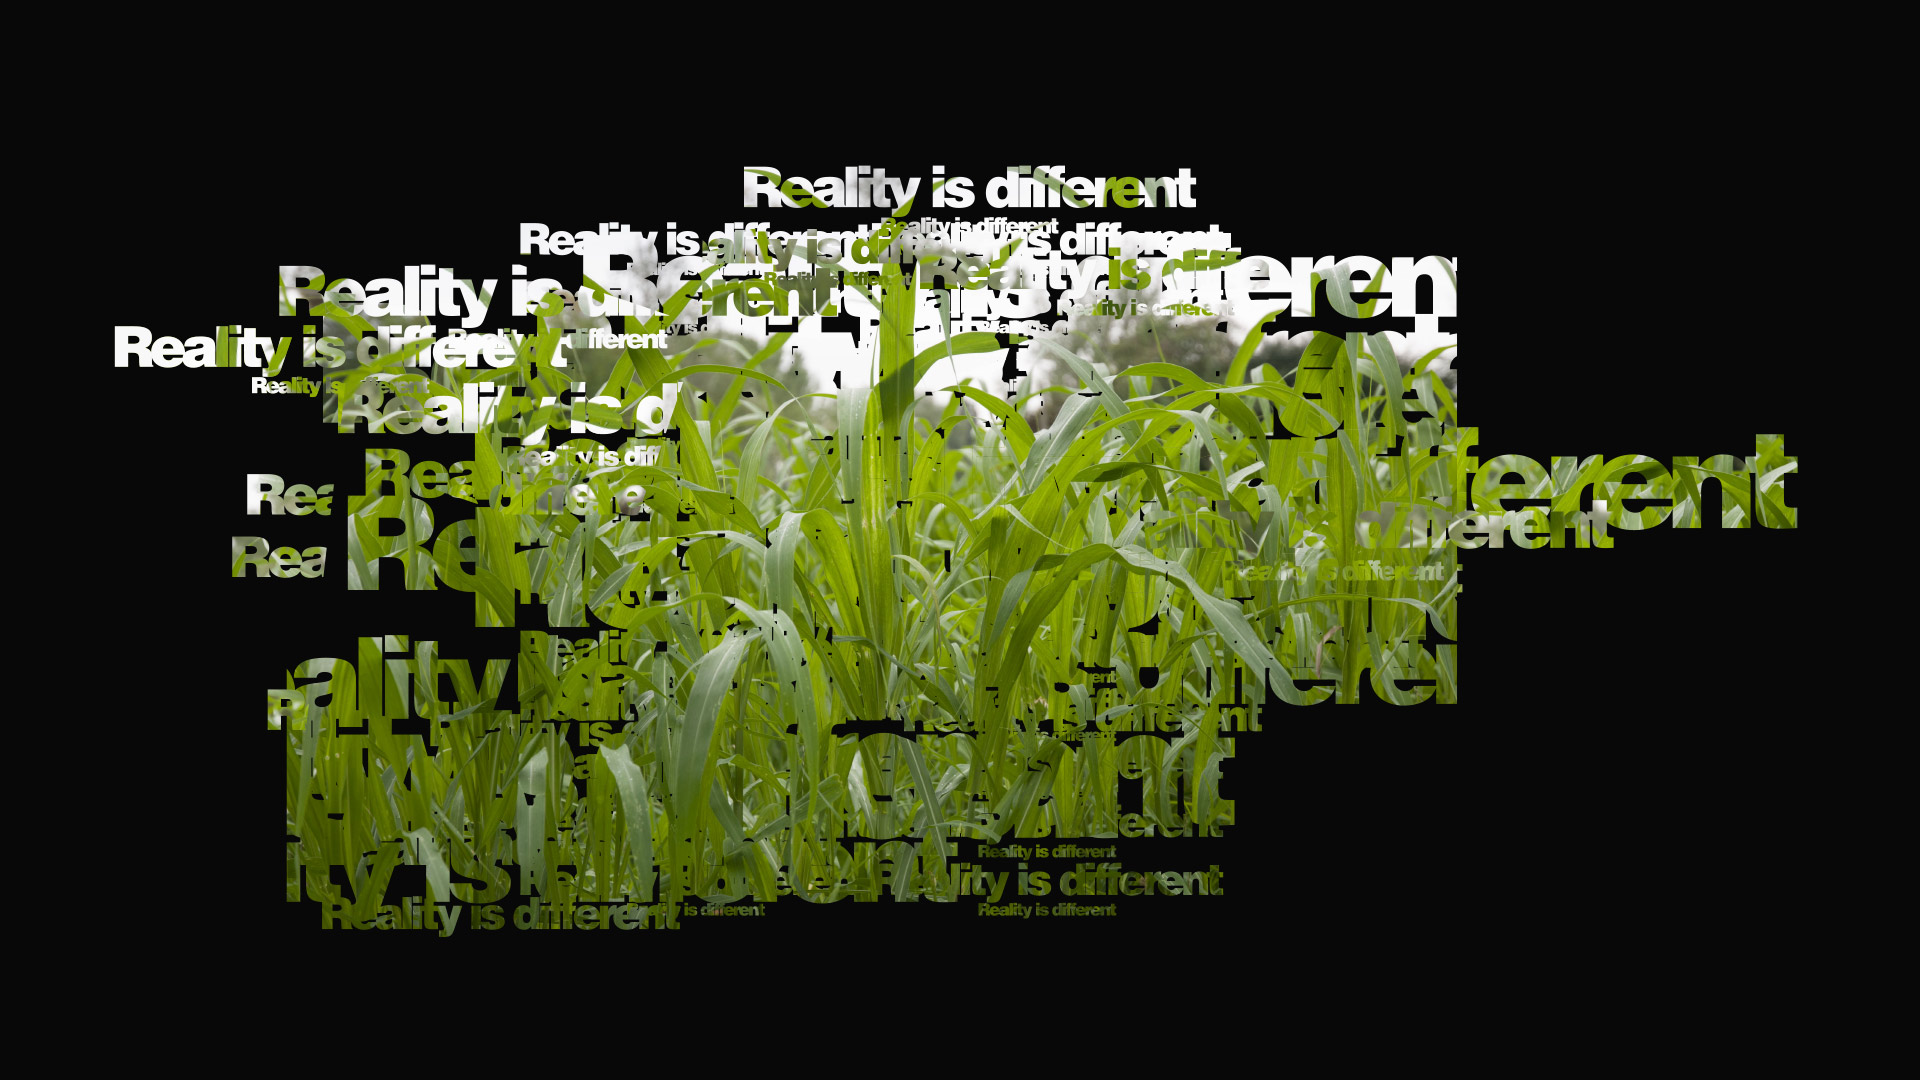 Reality is different